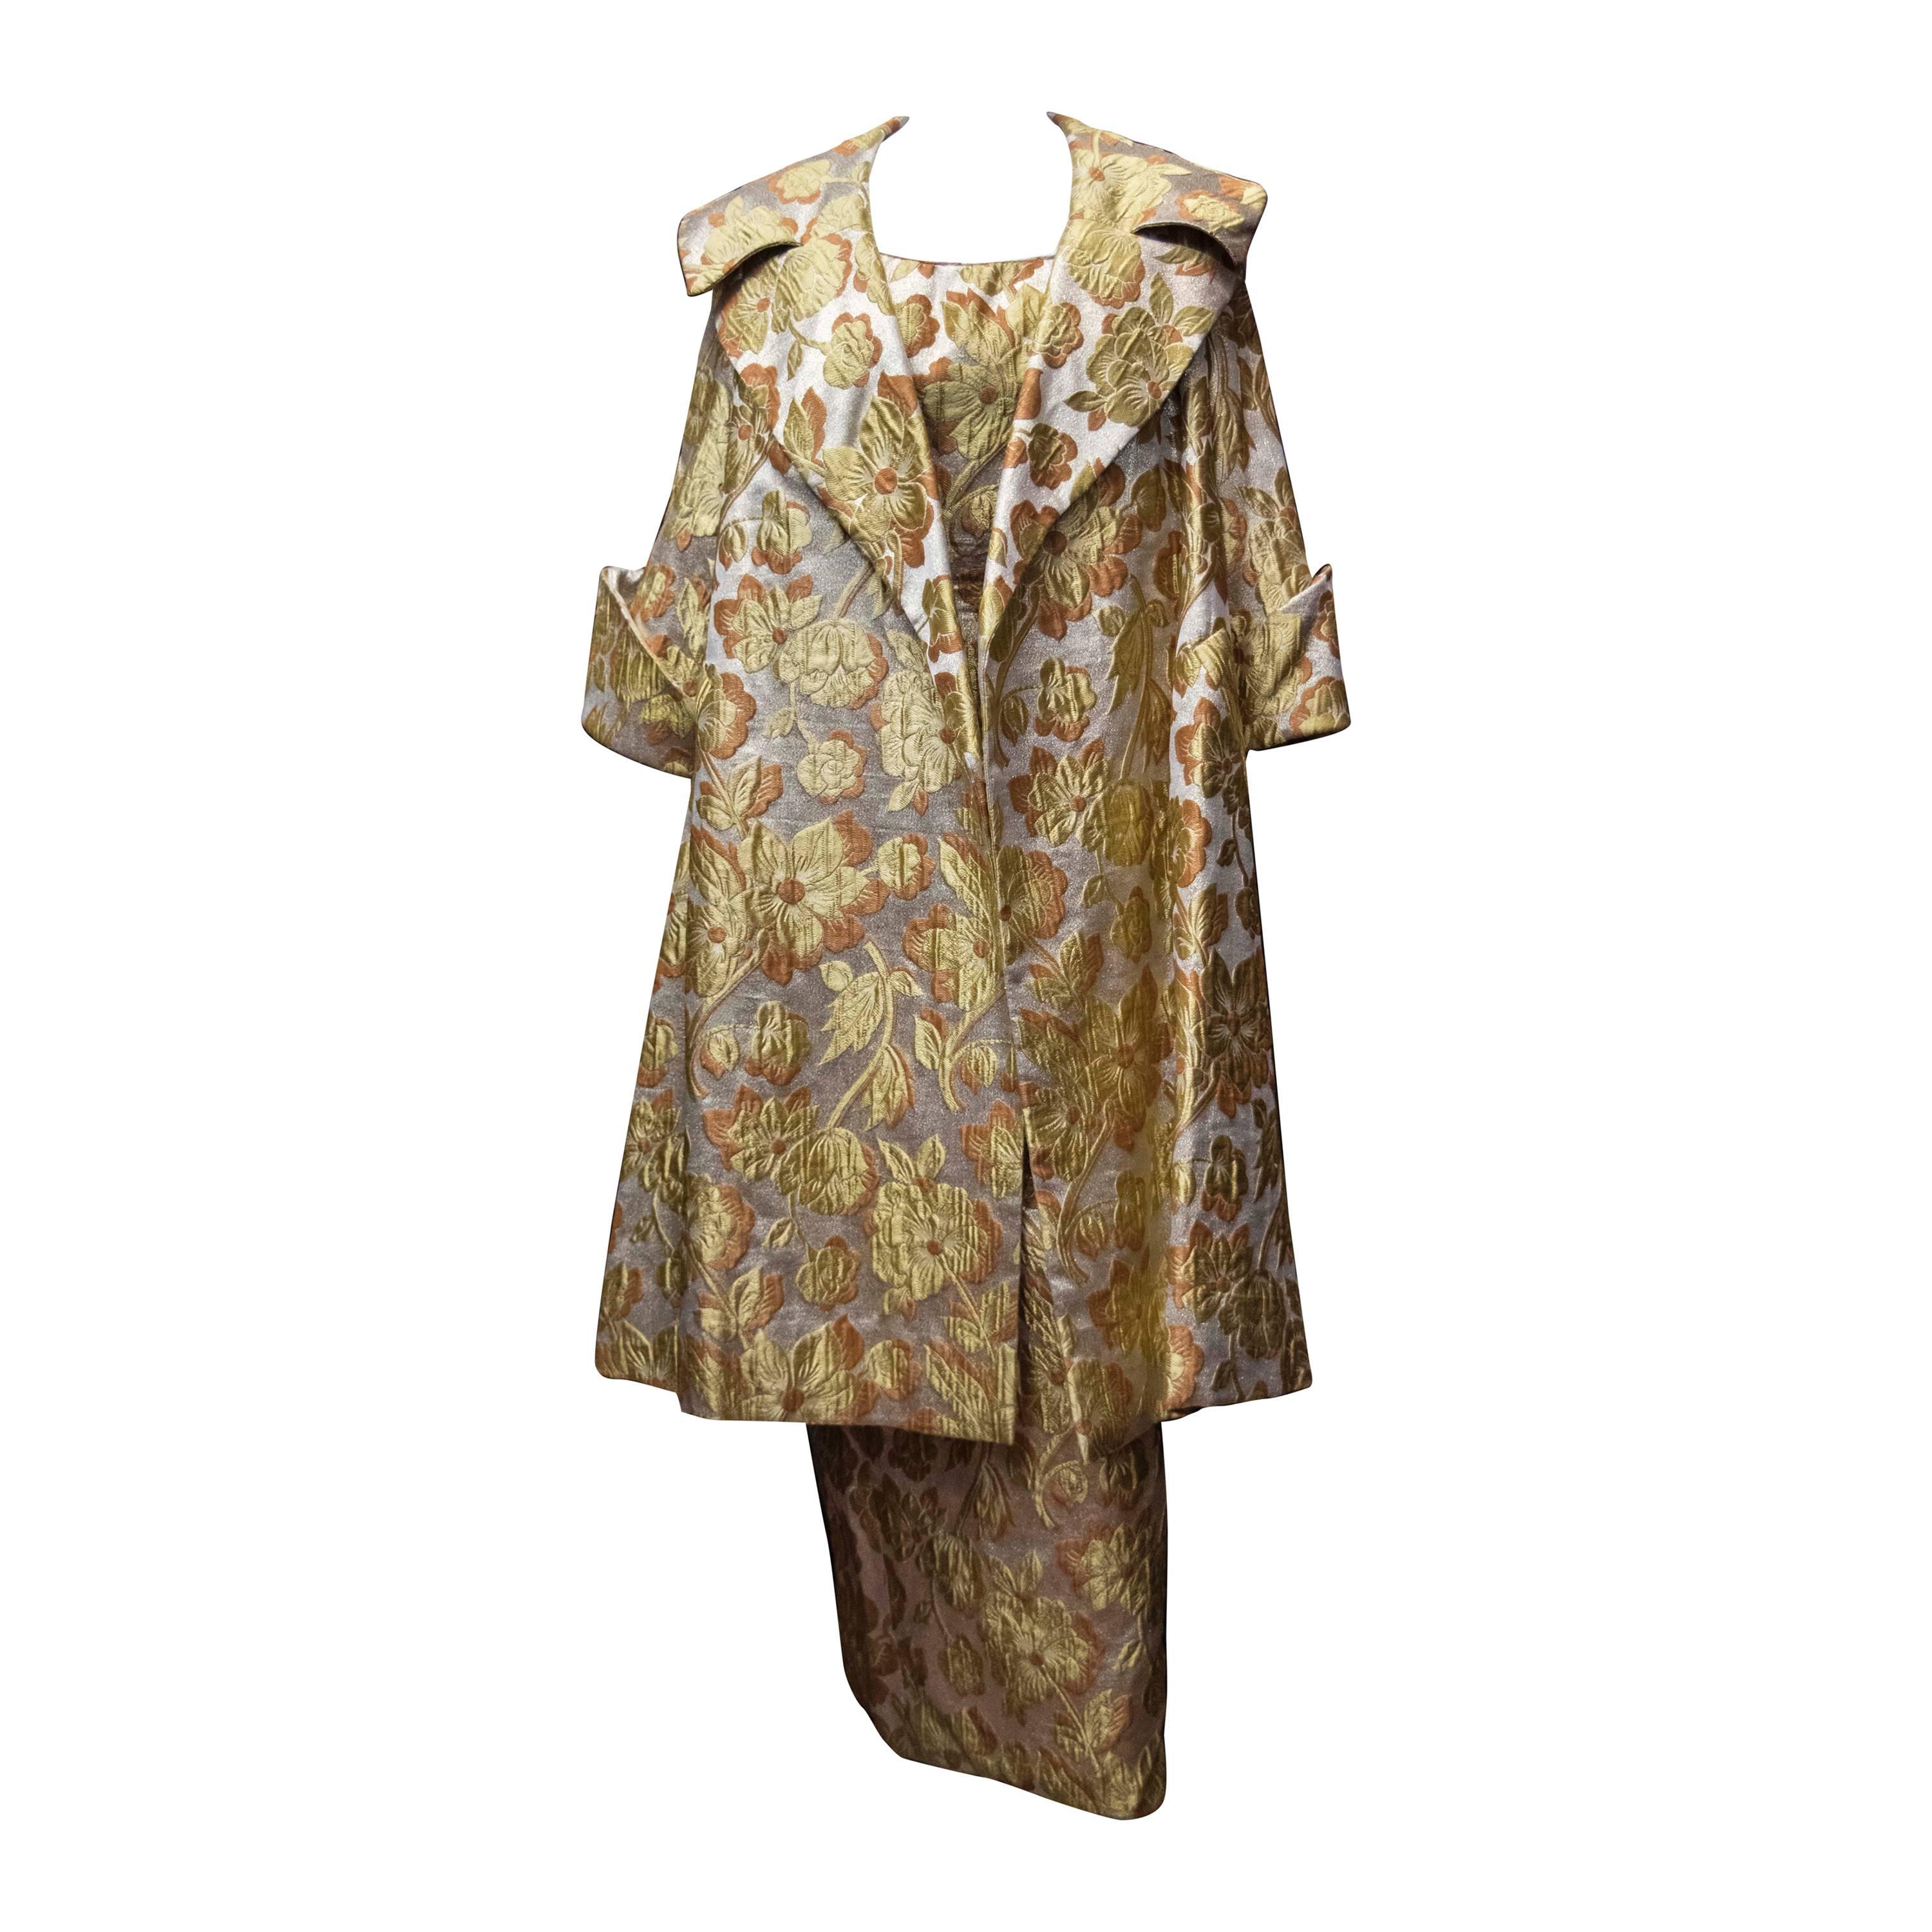 Mr Blackwell 1960s Gold Brocade Evening Dress and Coat